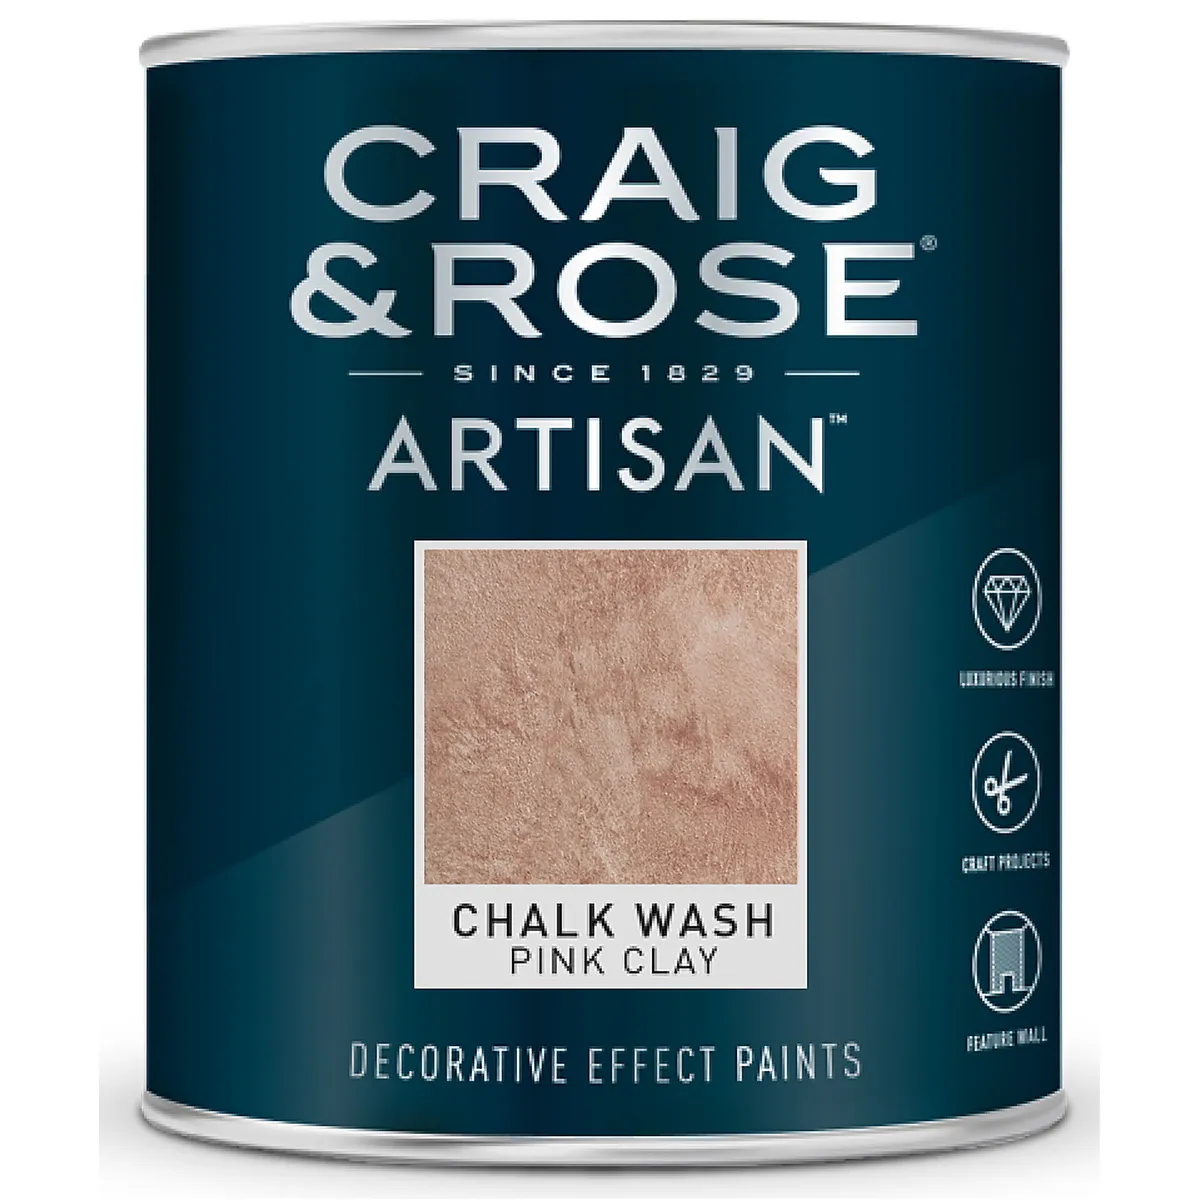 Craig & Rose Artisan Pink Clay Chalky effect Topcoat Chalkwash paint, 750ml